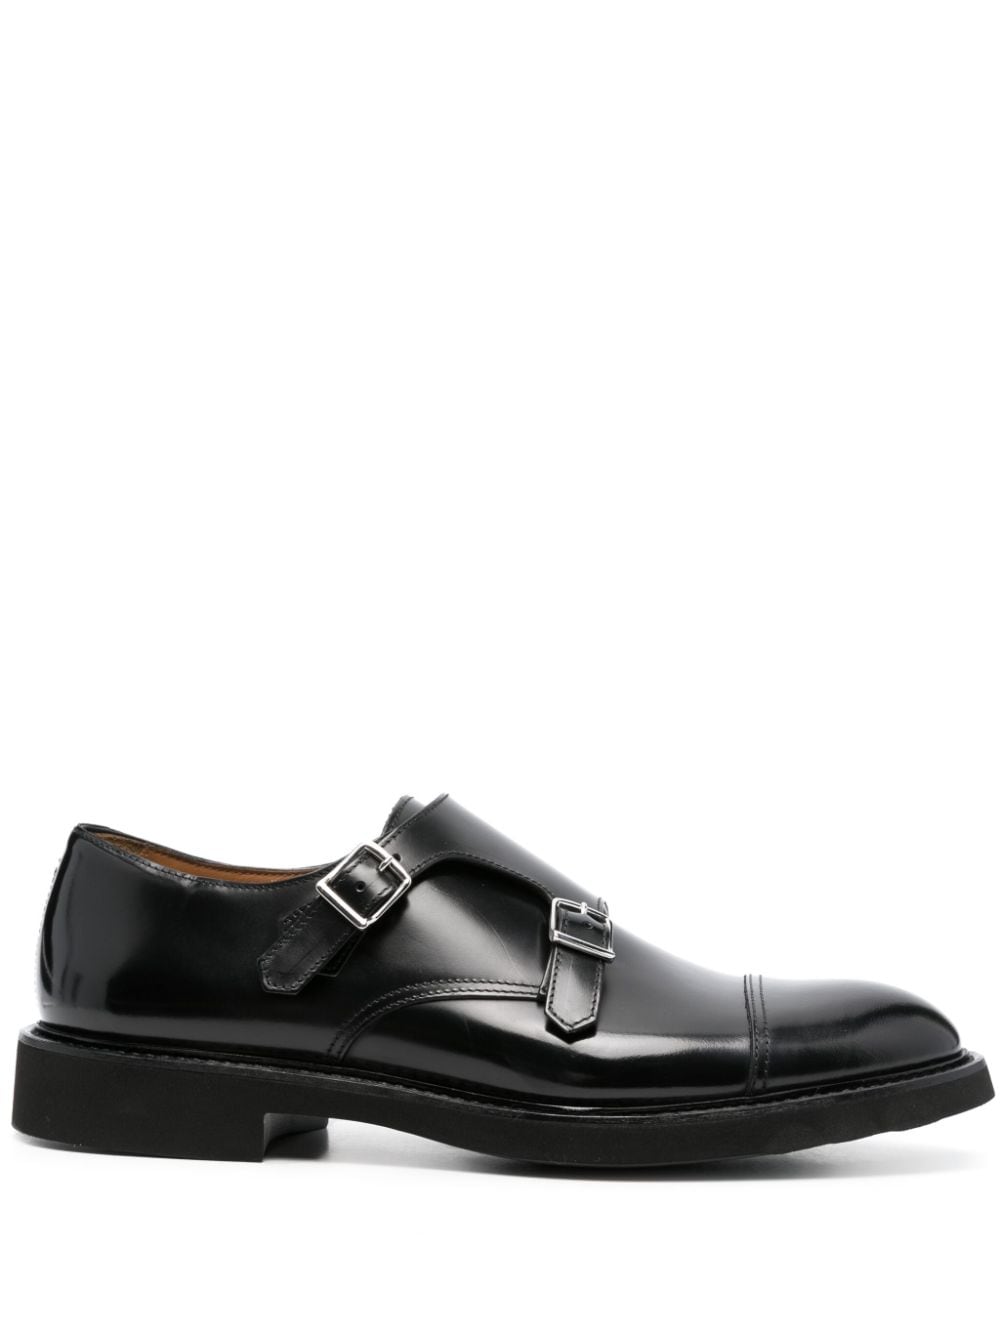 Doucal's buckle-fastening monk shoes - Black von Doucal's